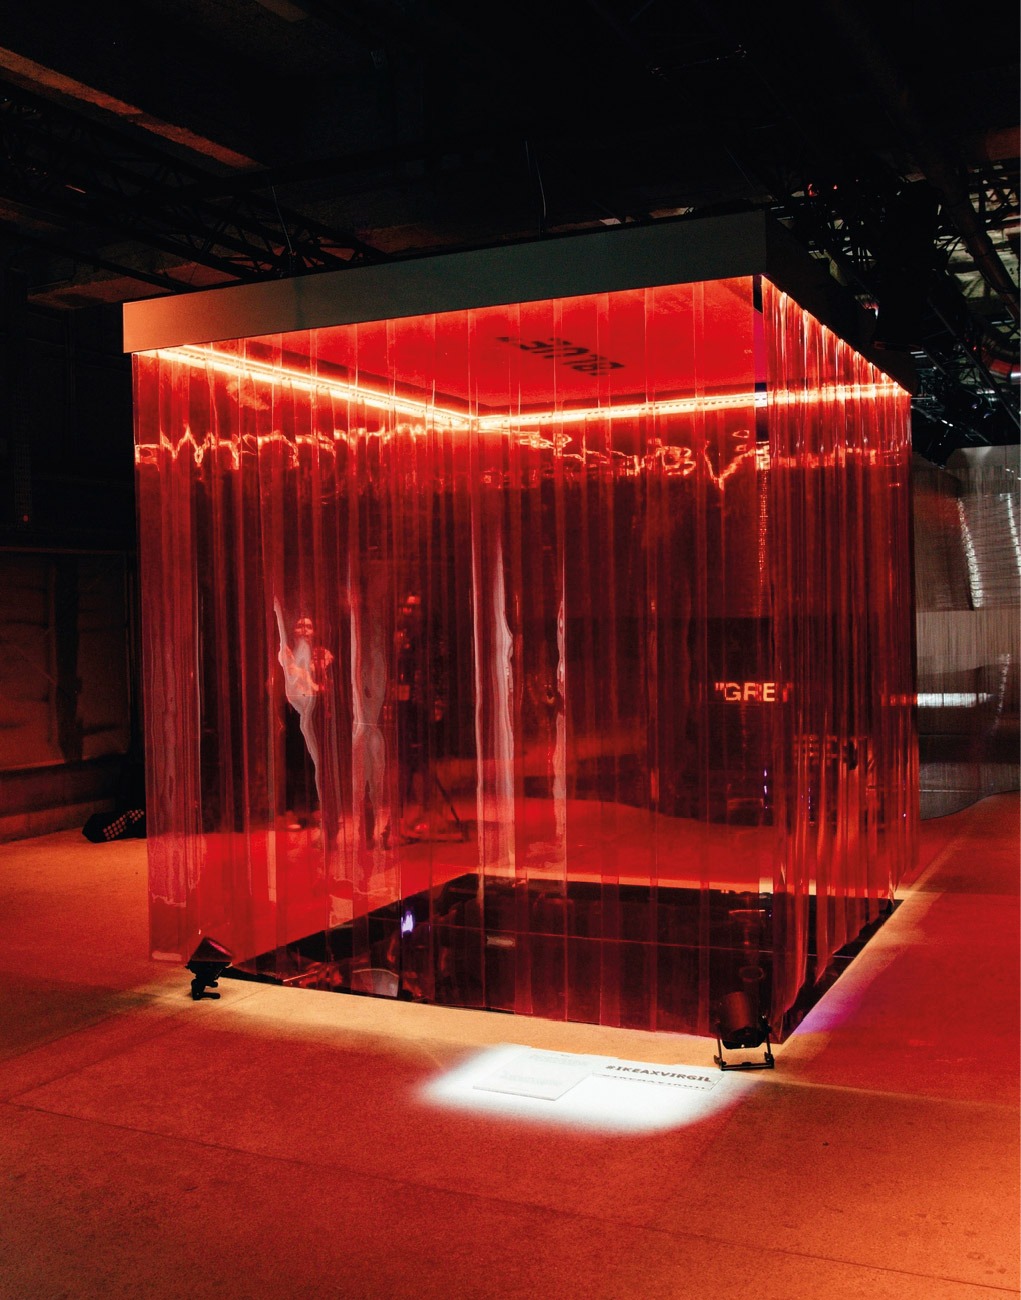 Art installation of plastic cube illuminated by red and white light in dark room.